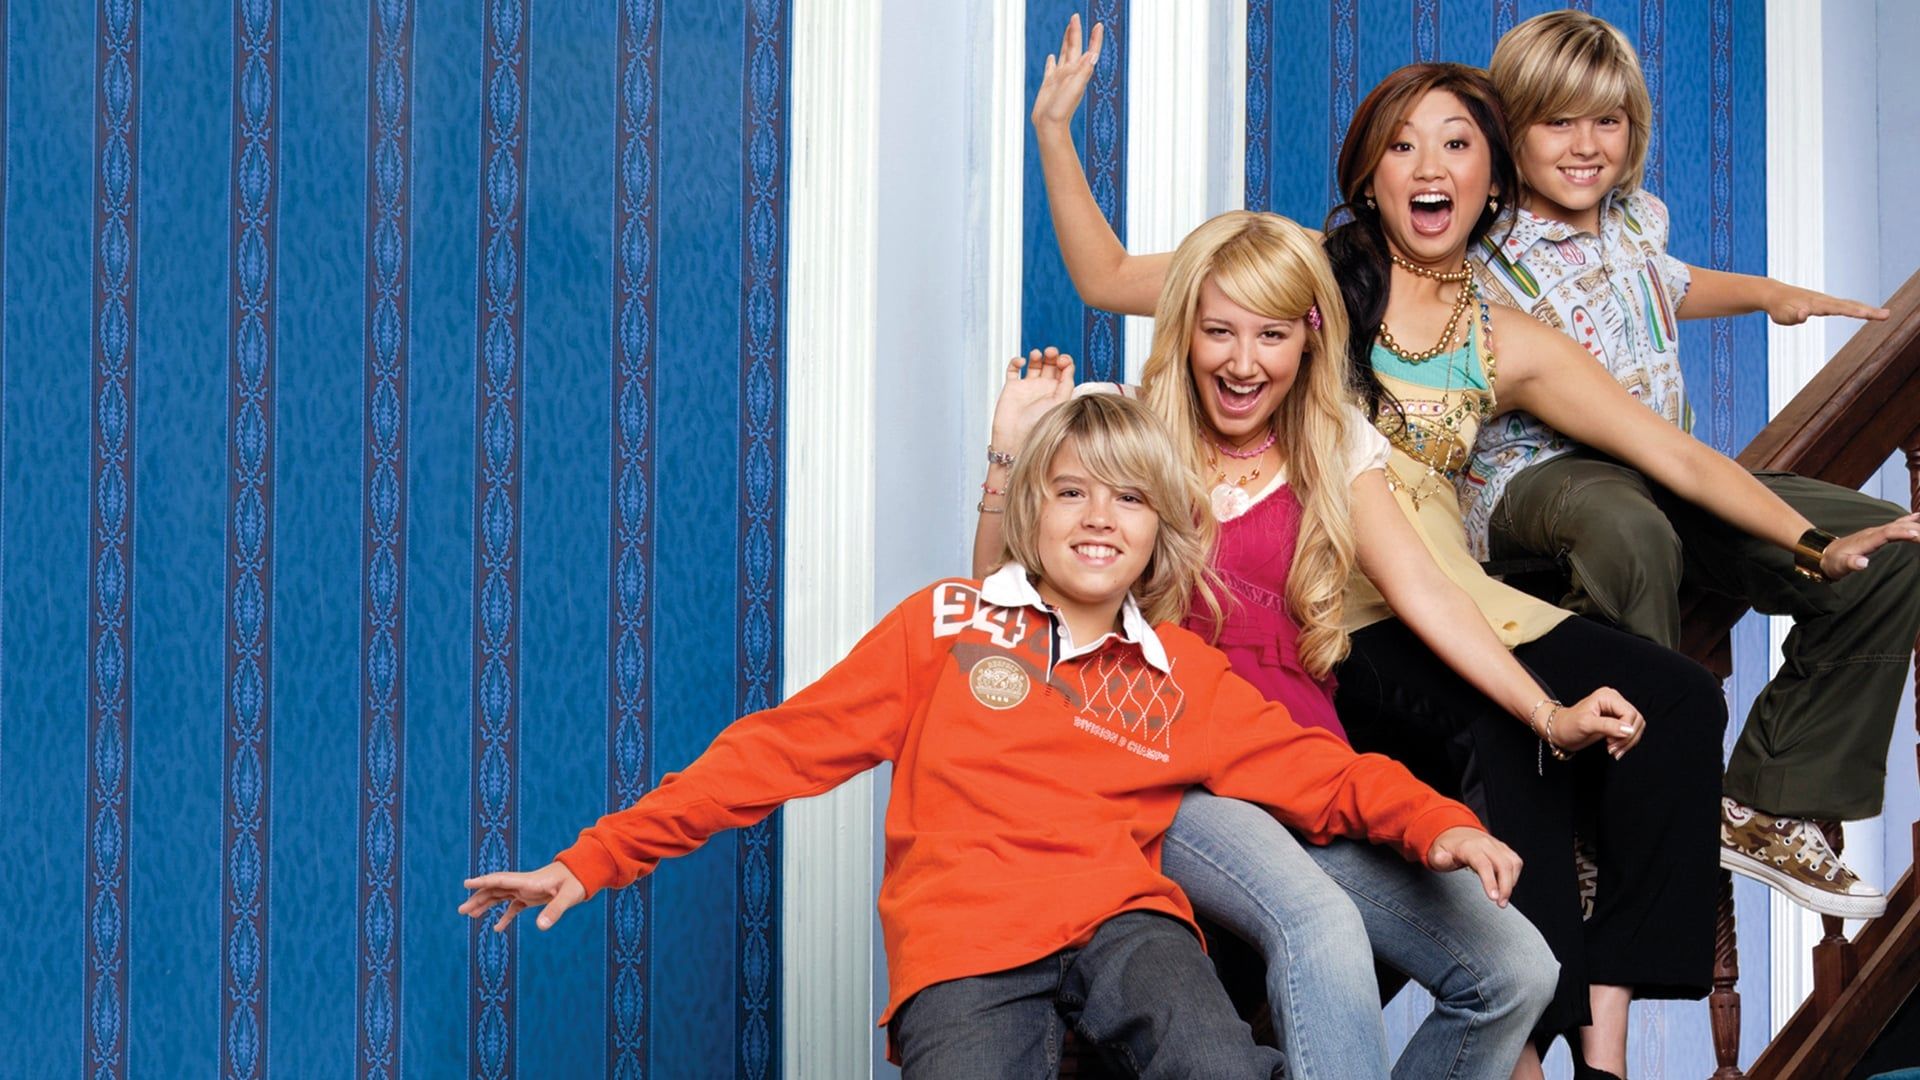 The Suite Life of Zack & Cody background